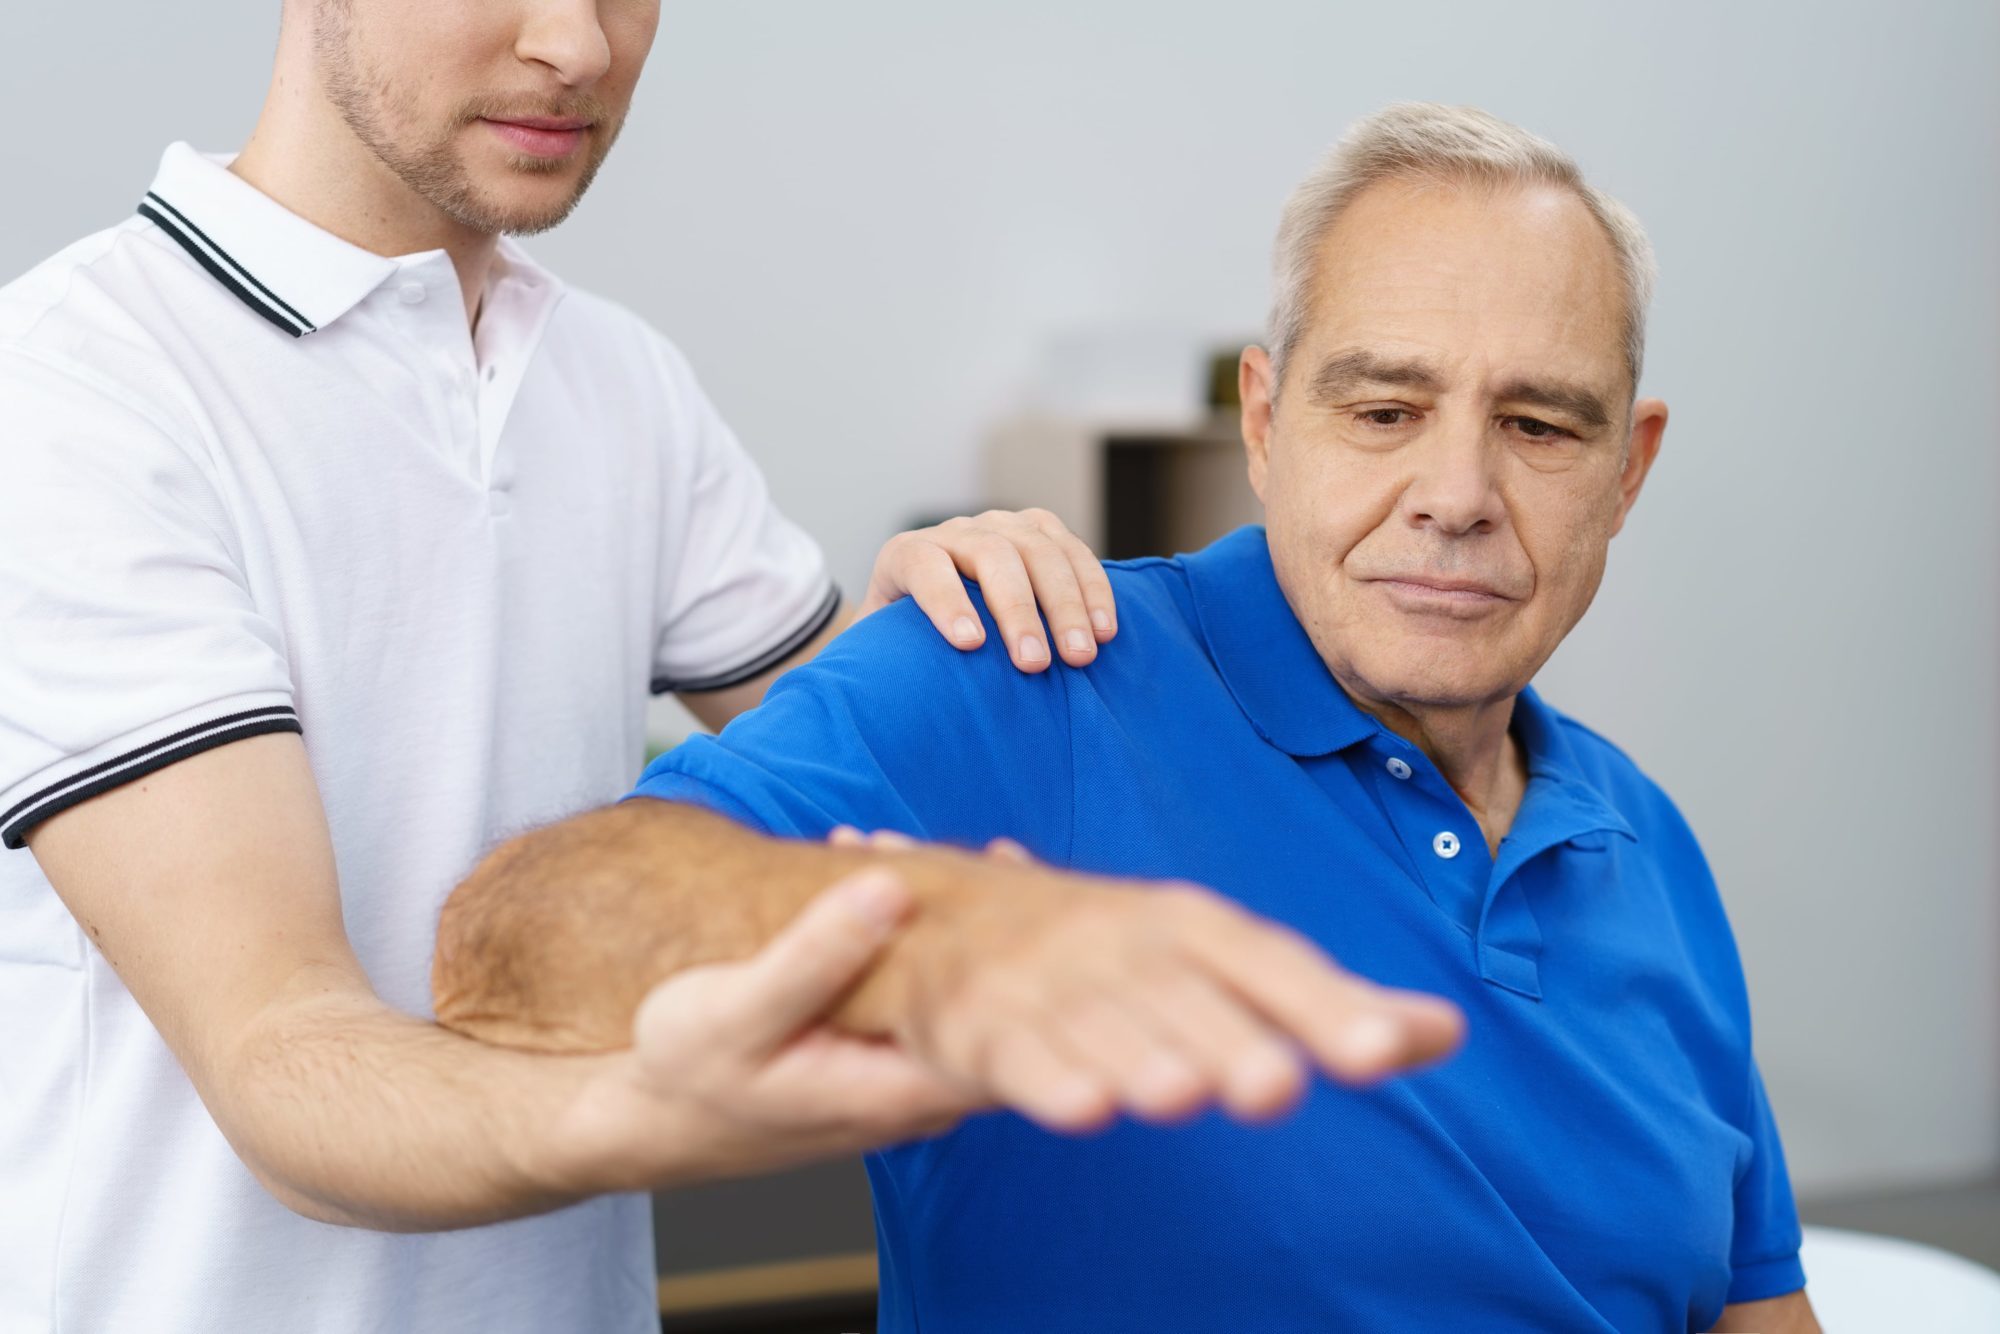 Benefits of Physical Therapy after Parkinson’s Diagnosis